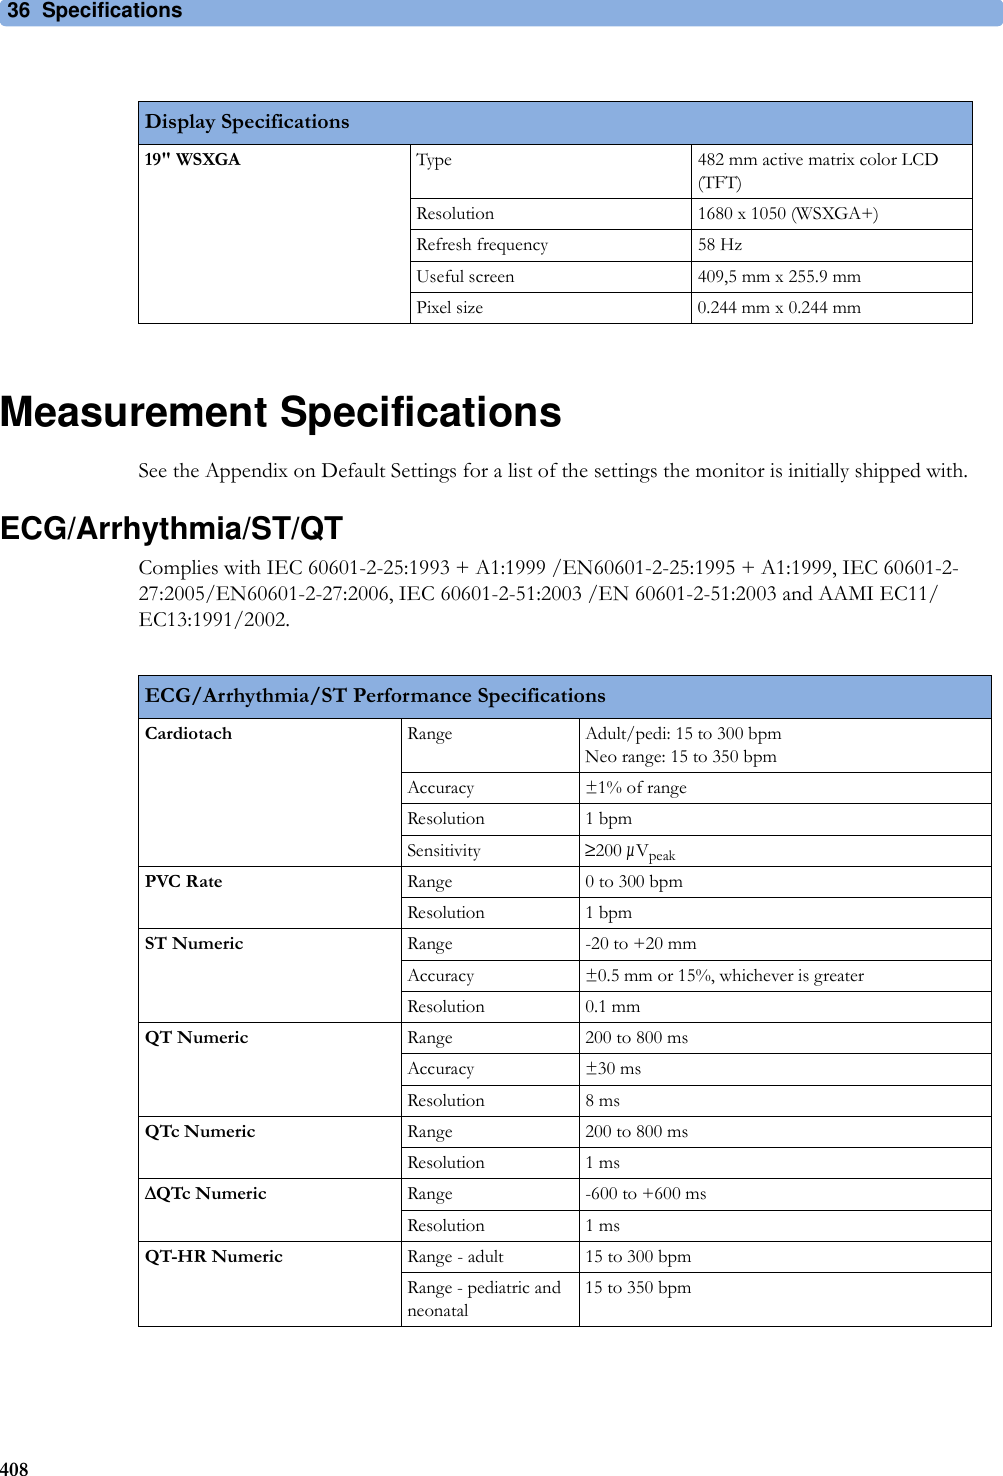 36 Specifications408Measurement SpecificationsSee the Appendix on Default Settings for a list of the settings the monitor is initially shipped with.ECG/Arrhythmia/ST/QTComplies with IEC 60601-2-25:1993 + A1:1999 /EN60601-2-25:1995 + A1:1999, IEC 60601-2-27:2005/EN60601-2-27:2006, IEC 60601-2-51:2003 /EN 60601-2-51:2003 and AAMI EC11/EC13:1991/2002.Display Specifications19&quot; WSXGA Type 482 mm active matrix color LCD (TFT)Resolution 1680 x 1050 (WSXGA+)Refresh frequency 58 HzUseful screen 409,5 mm x 255.9 mmPixel size 0.244 mm x 0.244 mmECG/Arrhythmia/ST Performance SpecificationsCardiotach Range Adult/pedi: 15 to 300 bpmNeo range: 15 to 350 bpmAccuracy ±1% of rangeResolution 1 bpmSensitivity ≥200 µVpeakPVC Rate Range 0 to 300 bpmResolution 1 bpmST Numeric Range -20 to +20 mmAccuracy ±0.5 mm or 15%, whichever is greaterResolution 0.1 mmQT Numeric Range 200 to 800 msAccuracy ±30 msResolution 8 msQTc Numeric Range 200 to 800 msResolution 1 msΔQTc Numeric Range -600 to +600 msResolution 1 msQT-HR Numeric Range - adult 15 to 300 bpmRange - pediatric and neonatal15 to 350 bpm